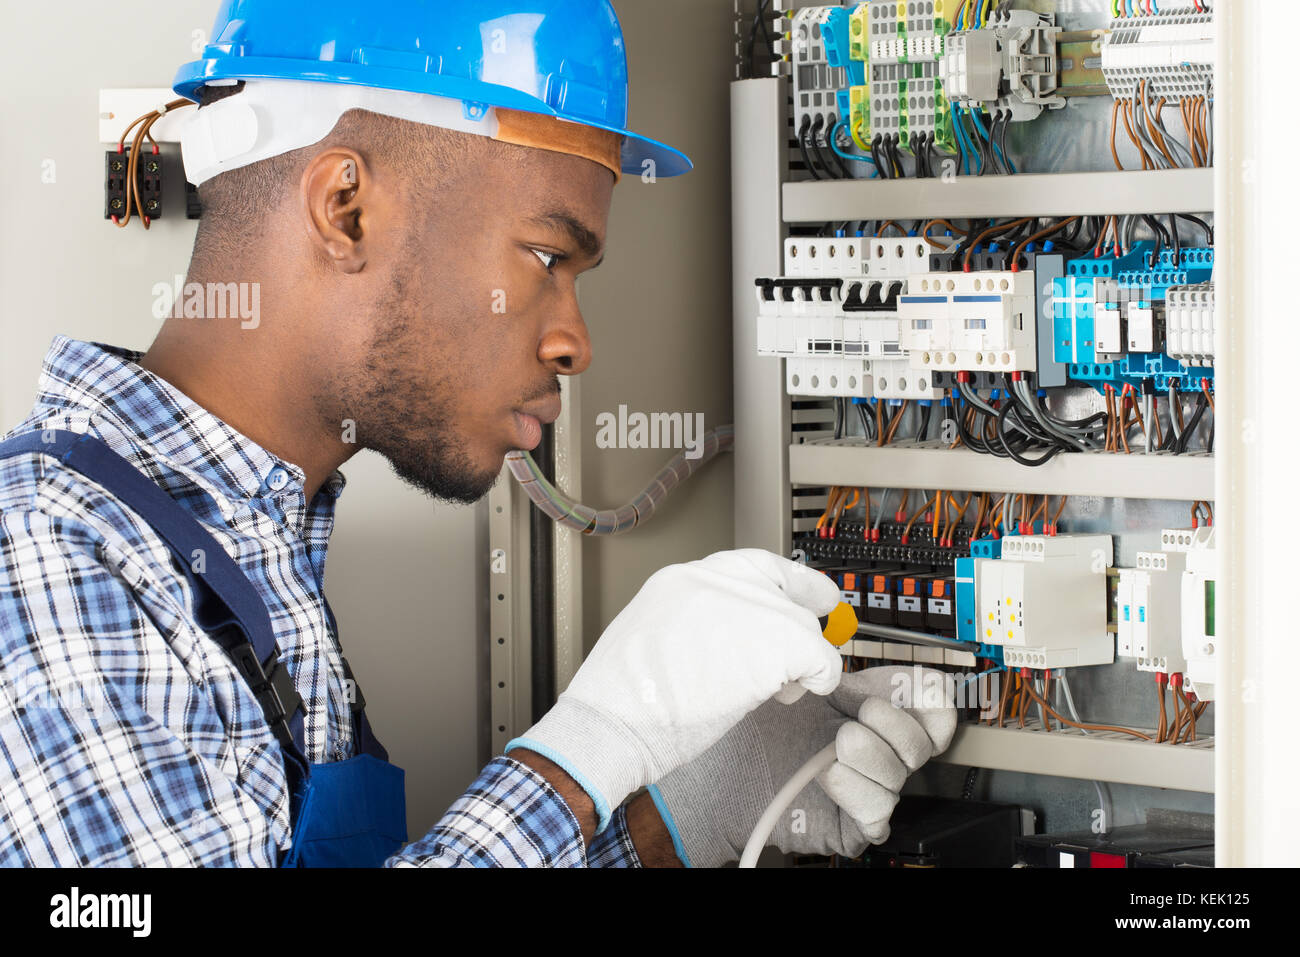 Young African Male Technician Repairing Fusebox With Screwdriver Stock Photo